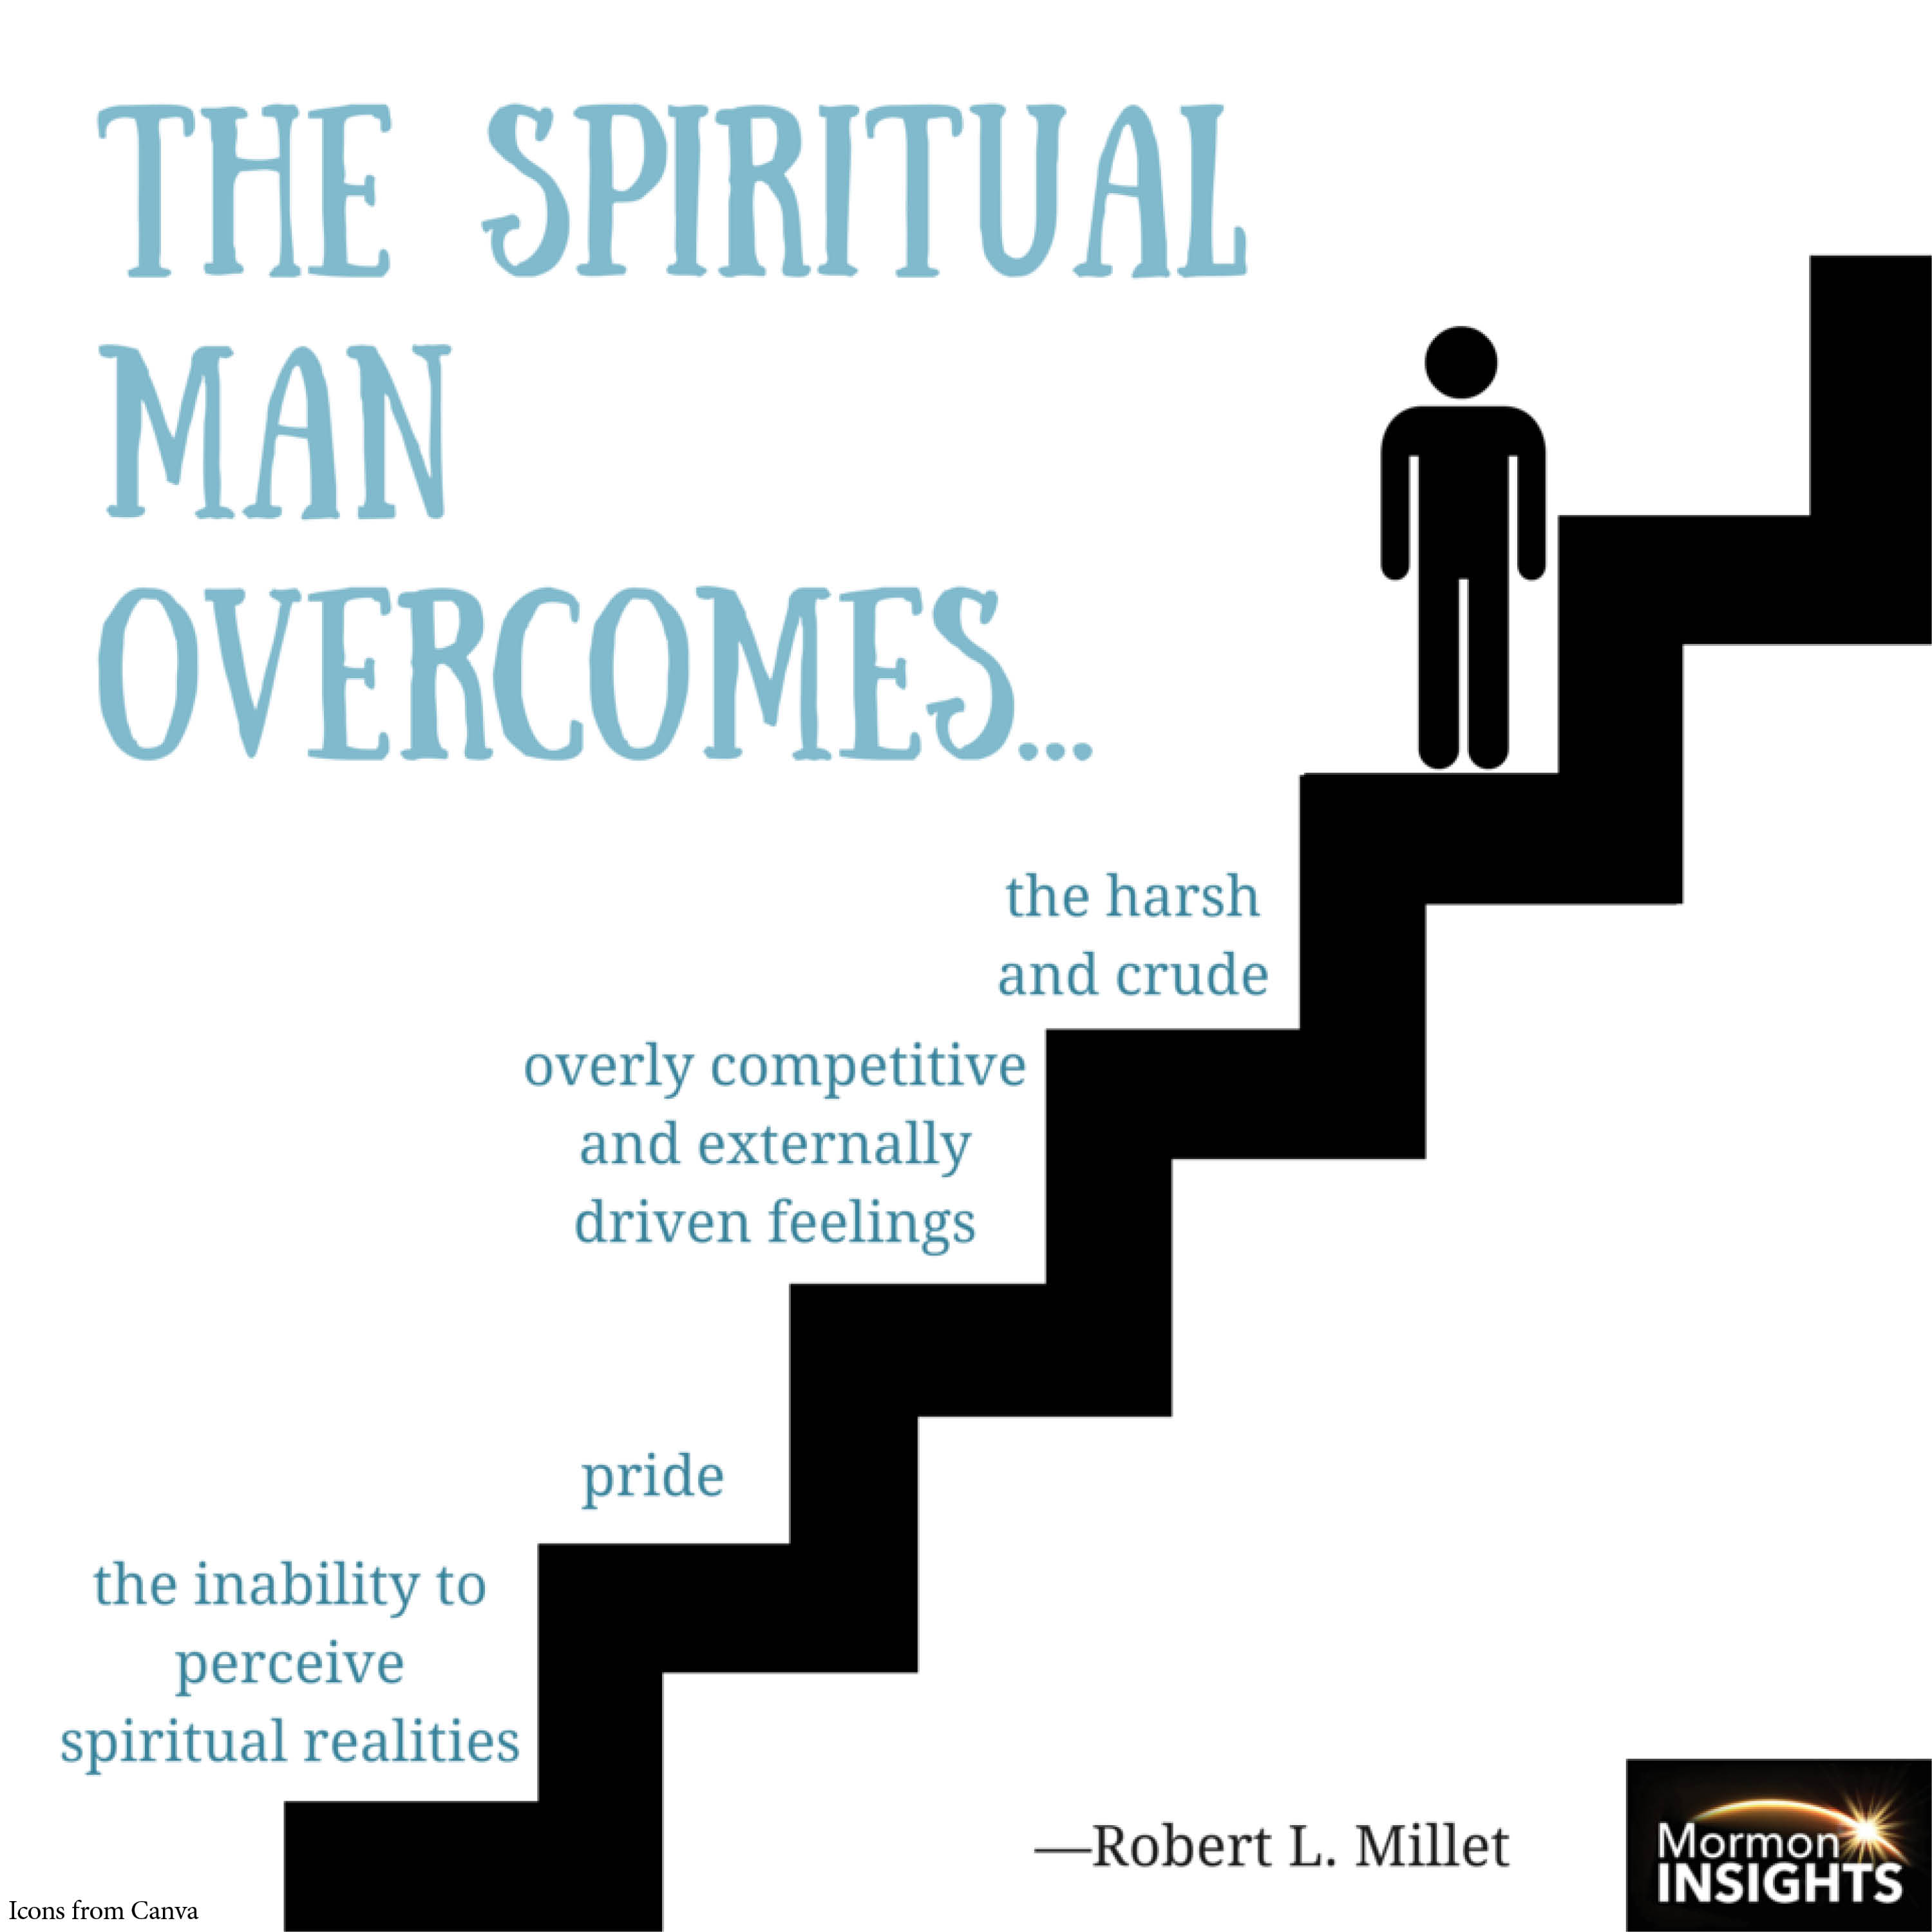 man going up steps, with the text: The spiritual man overcomes... the inability to perceive spiritual realities, pride, overly competitive and externally driven feelings, and the harsh and crude. - Robert L. Millet